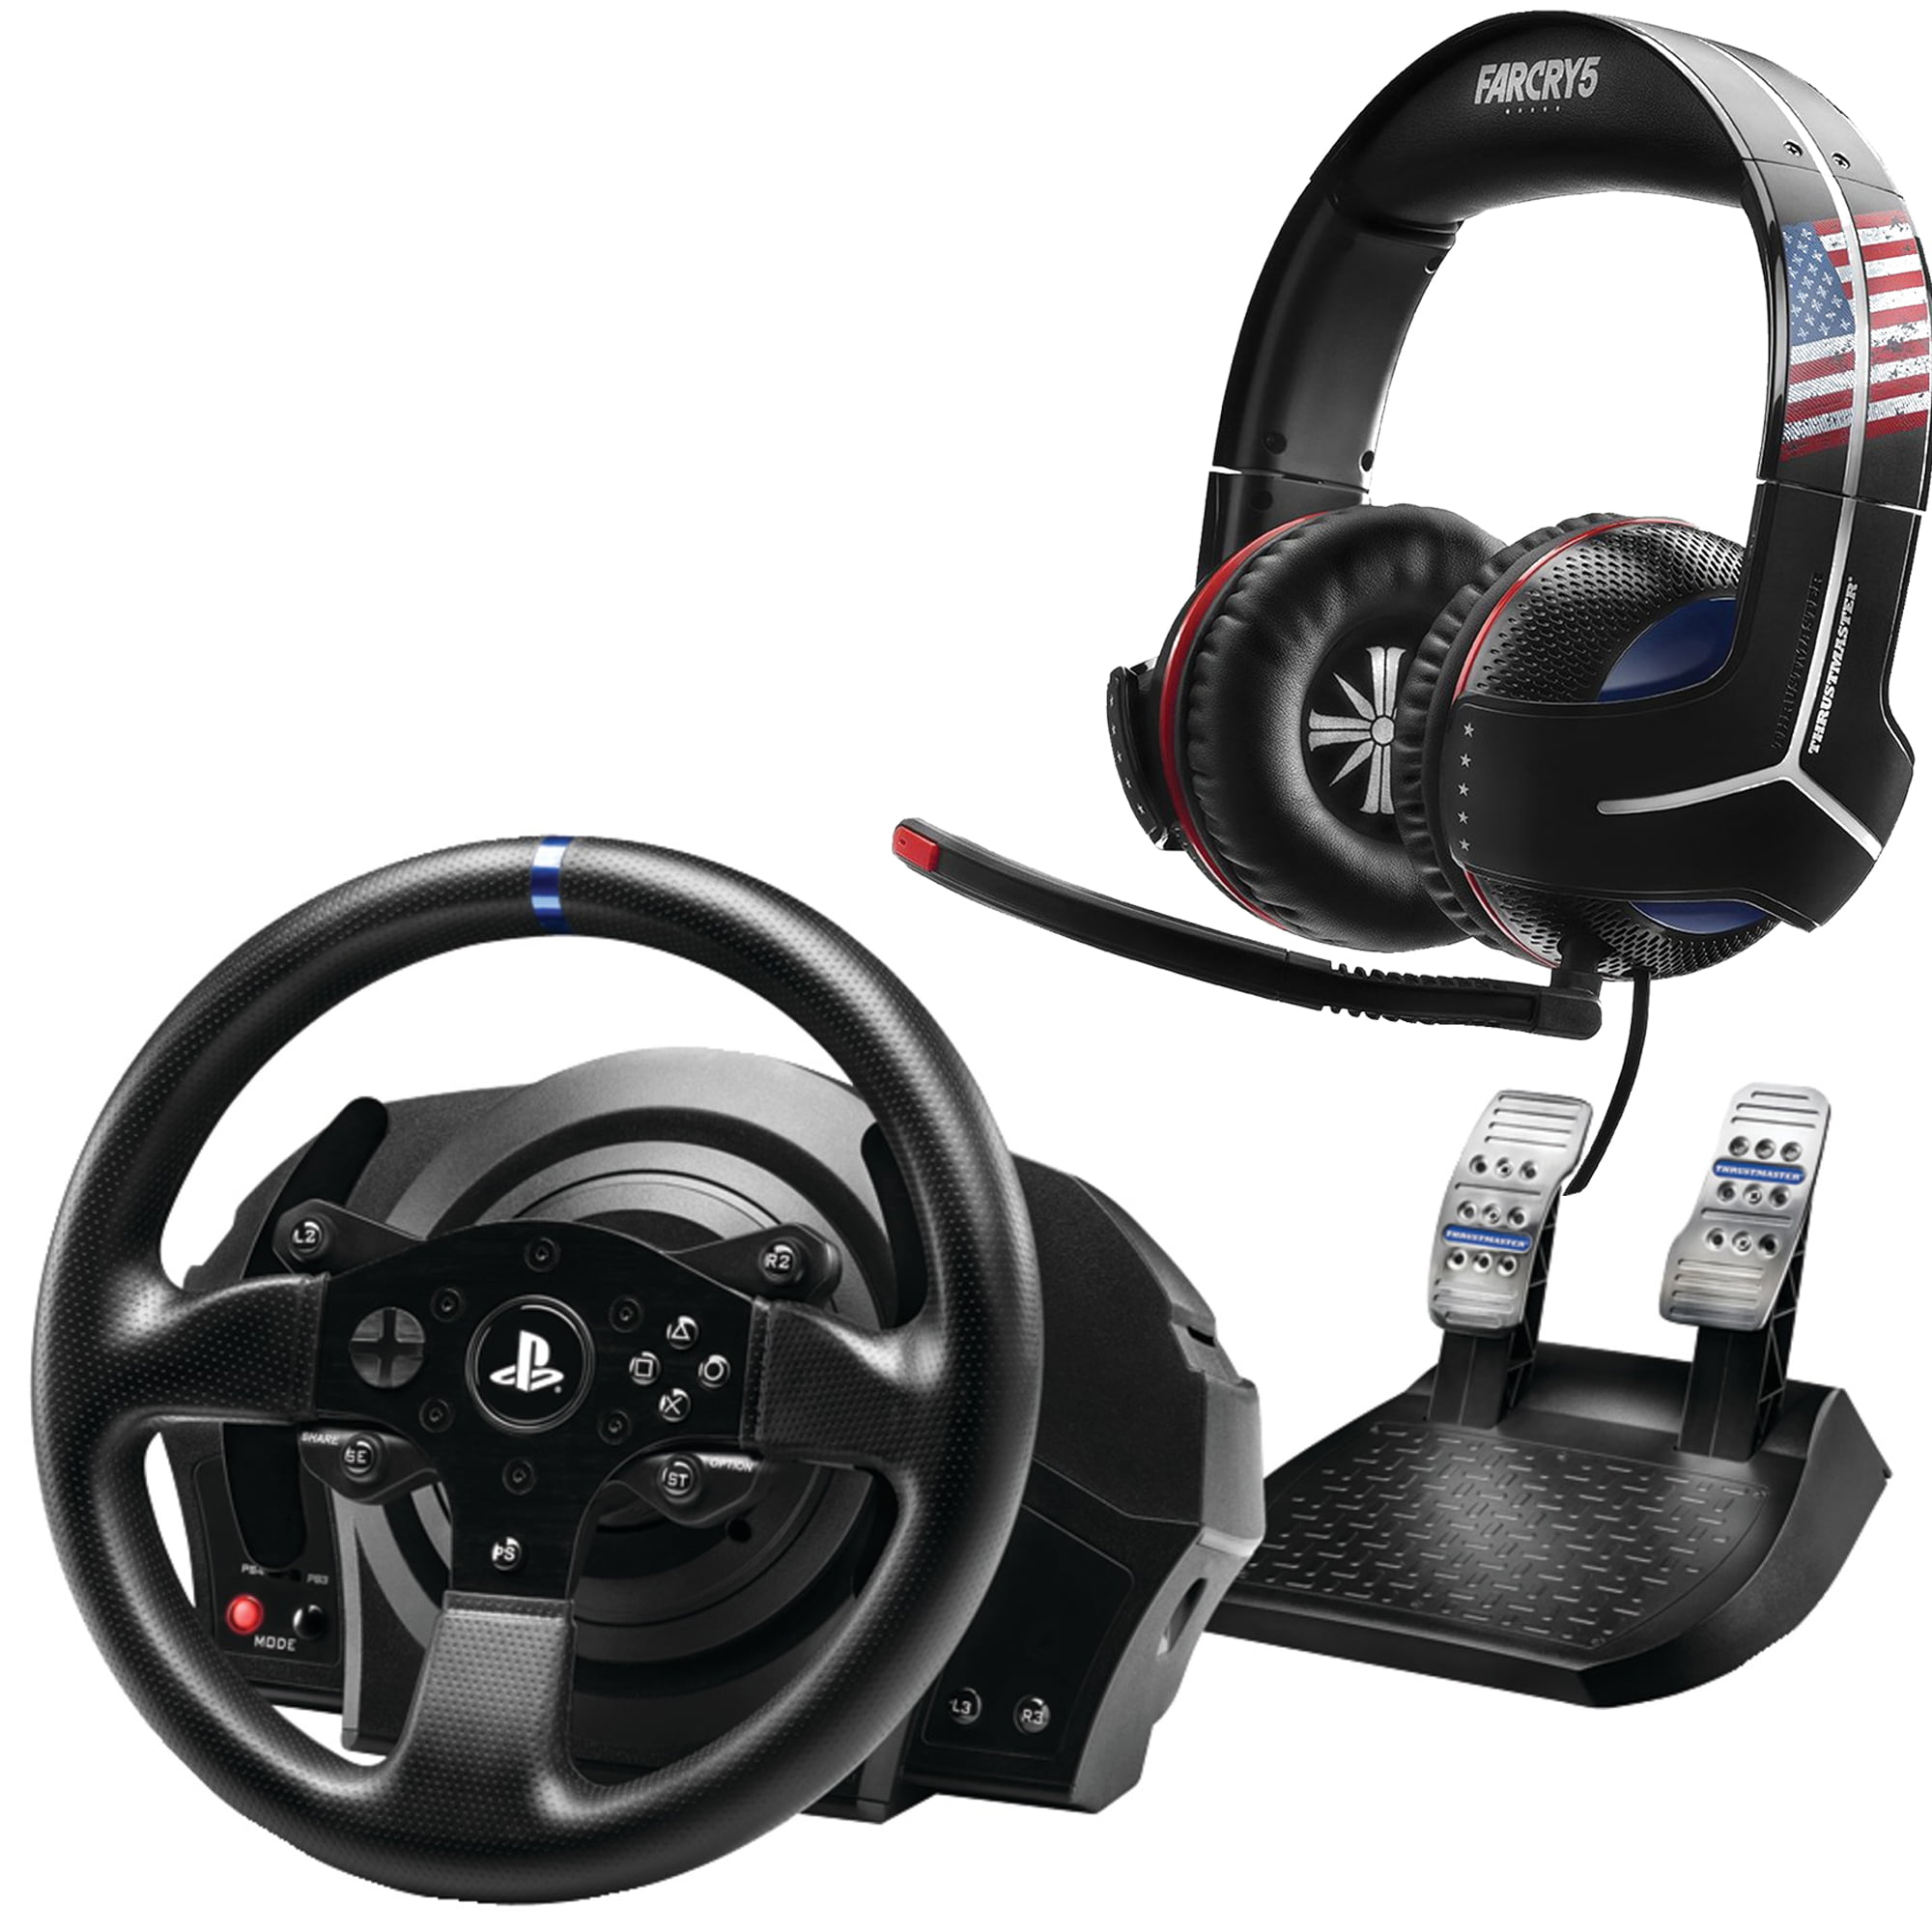 Thrustmaster t300rs. Thrustmaster t300rs Racing Wheel. Thrustmaster t300rs Ferrari. PLAYSTATION Thrustmaster 300rs. Thrustmaster ps4